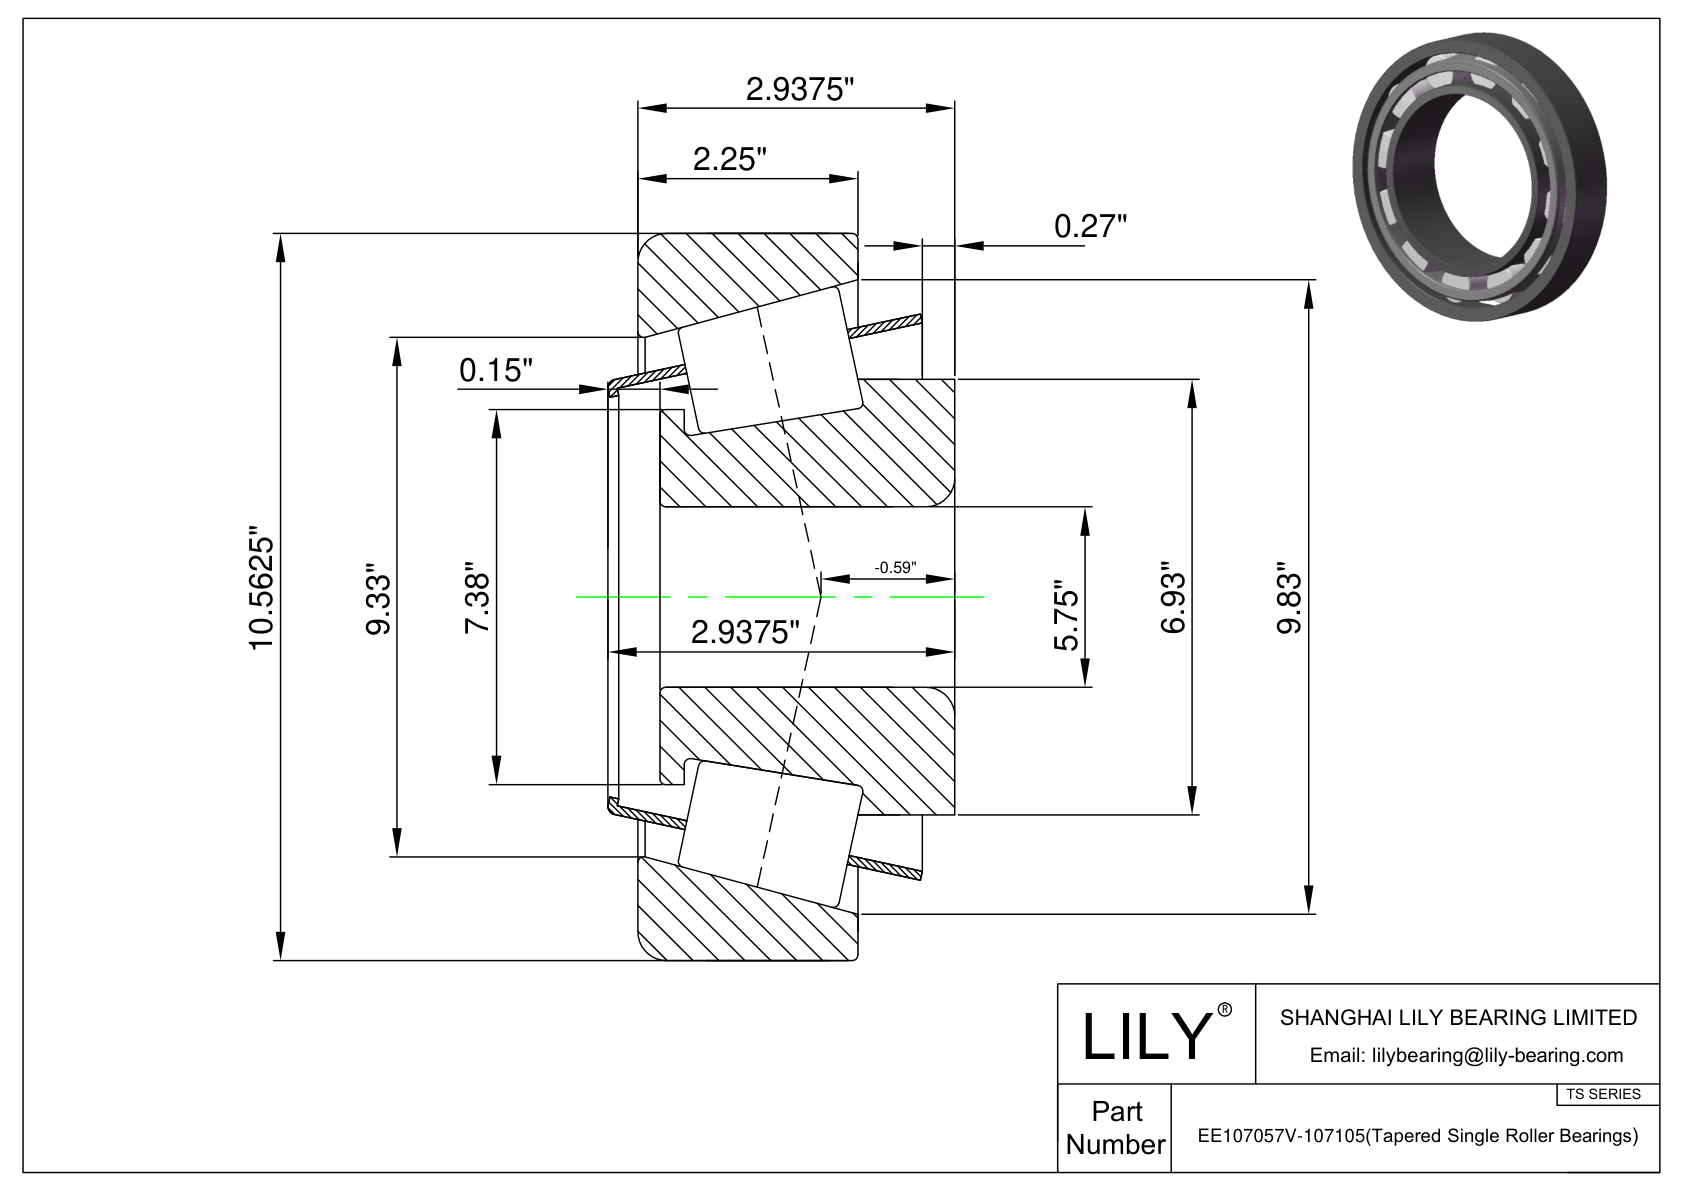 EE107057V-107105 TS (Tapered Single Roller Bearings) (Imperial) cad drawing